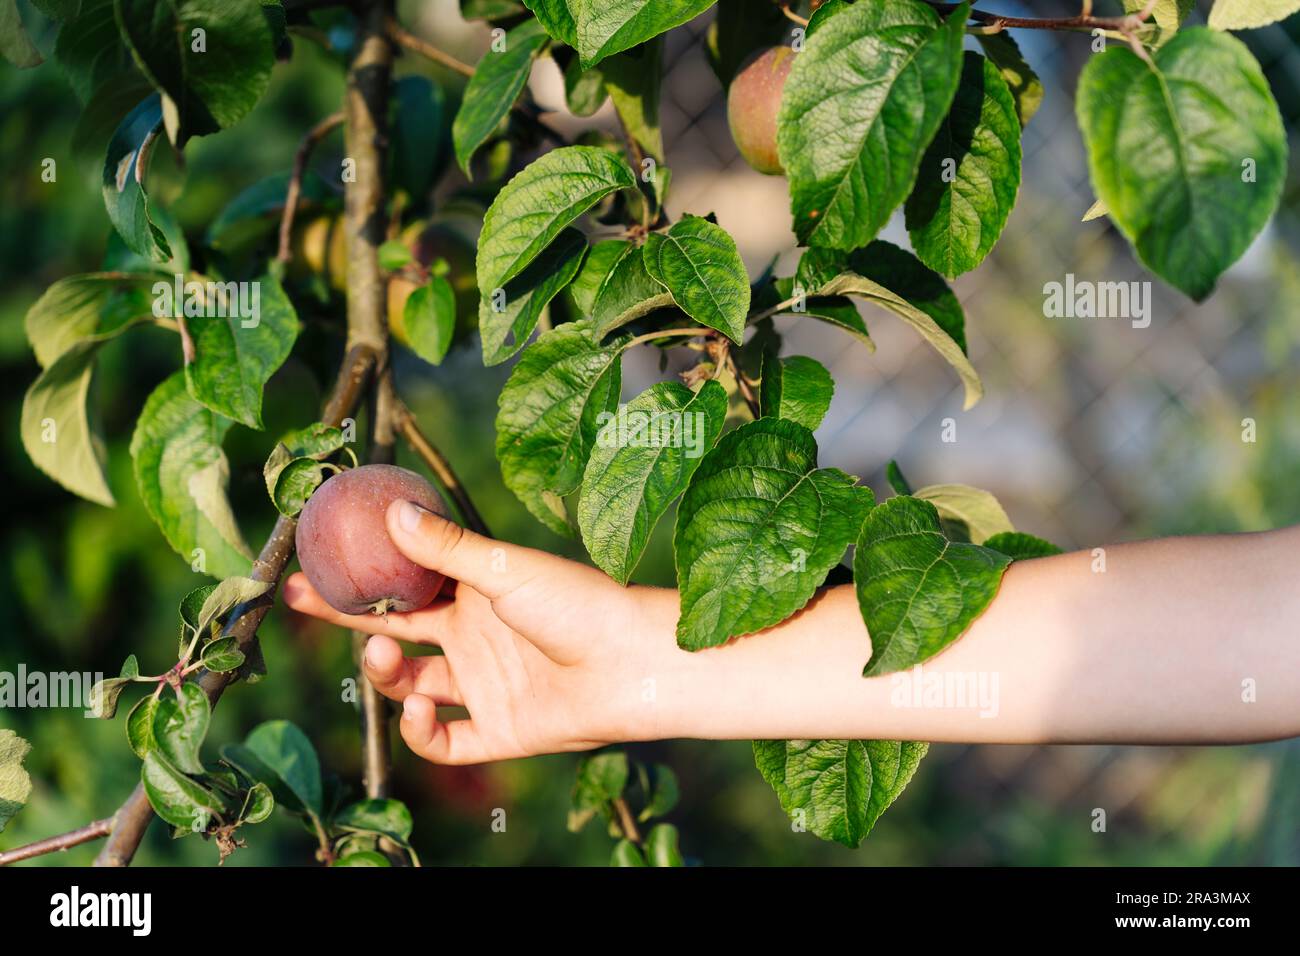 A boy's hand holds a red apple on a branch of an apple tree in the garden. Stock Photo